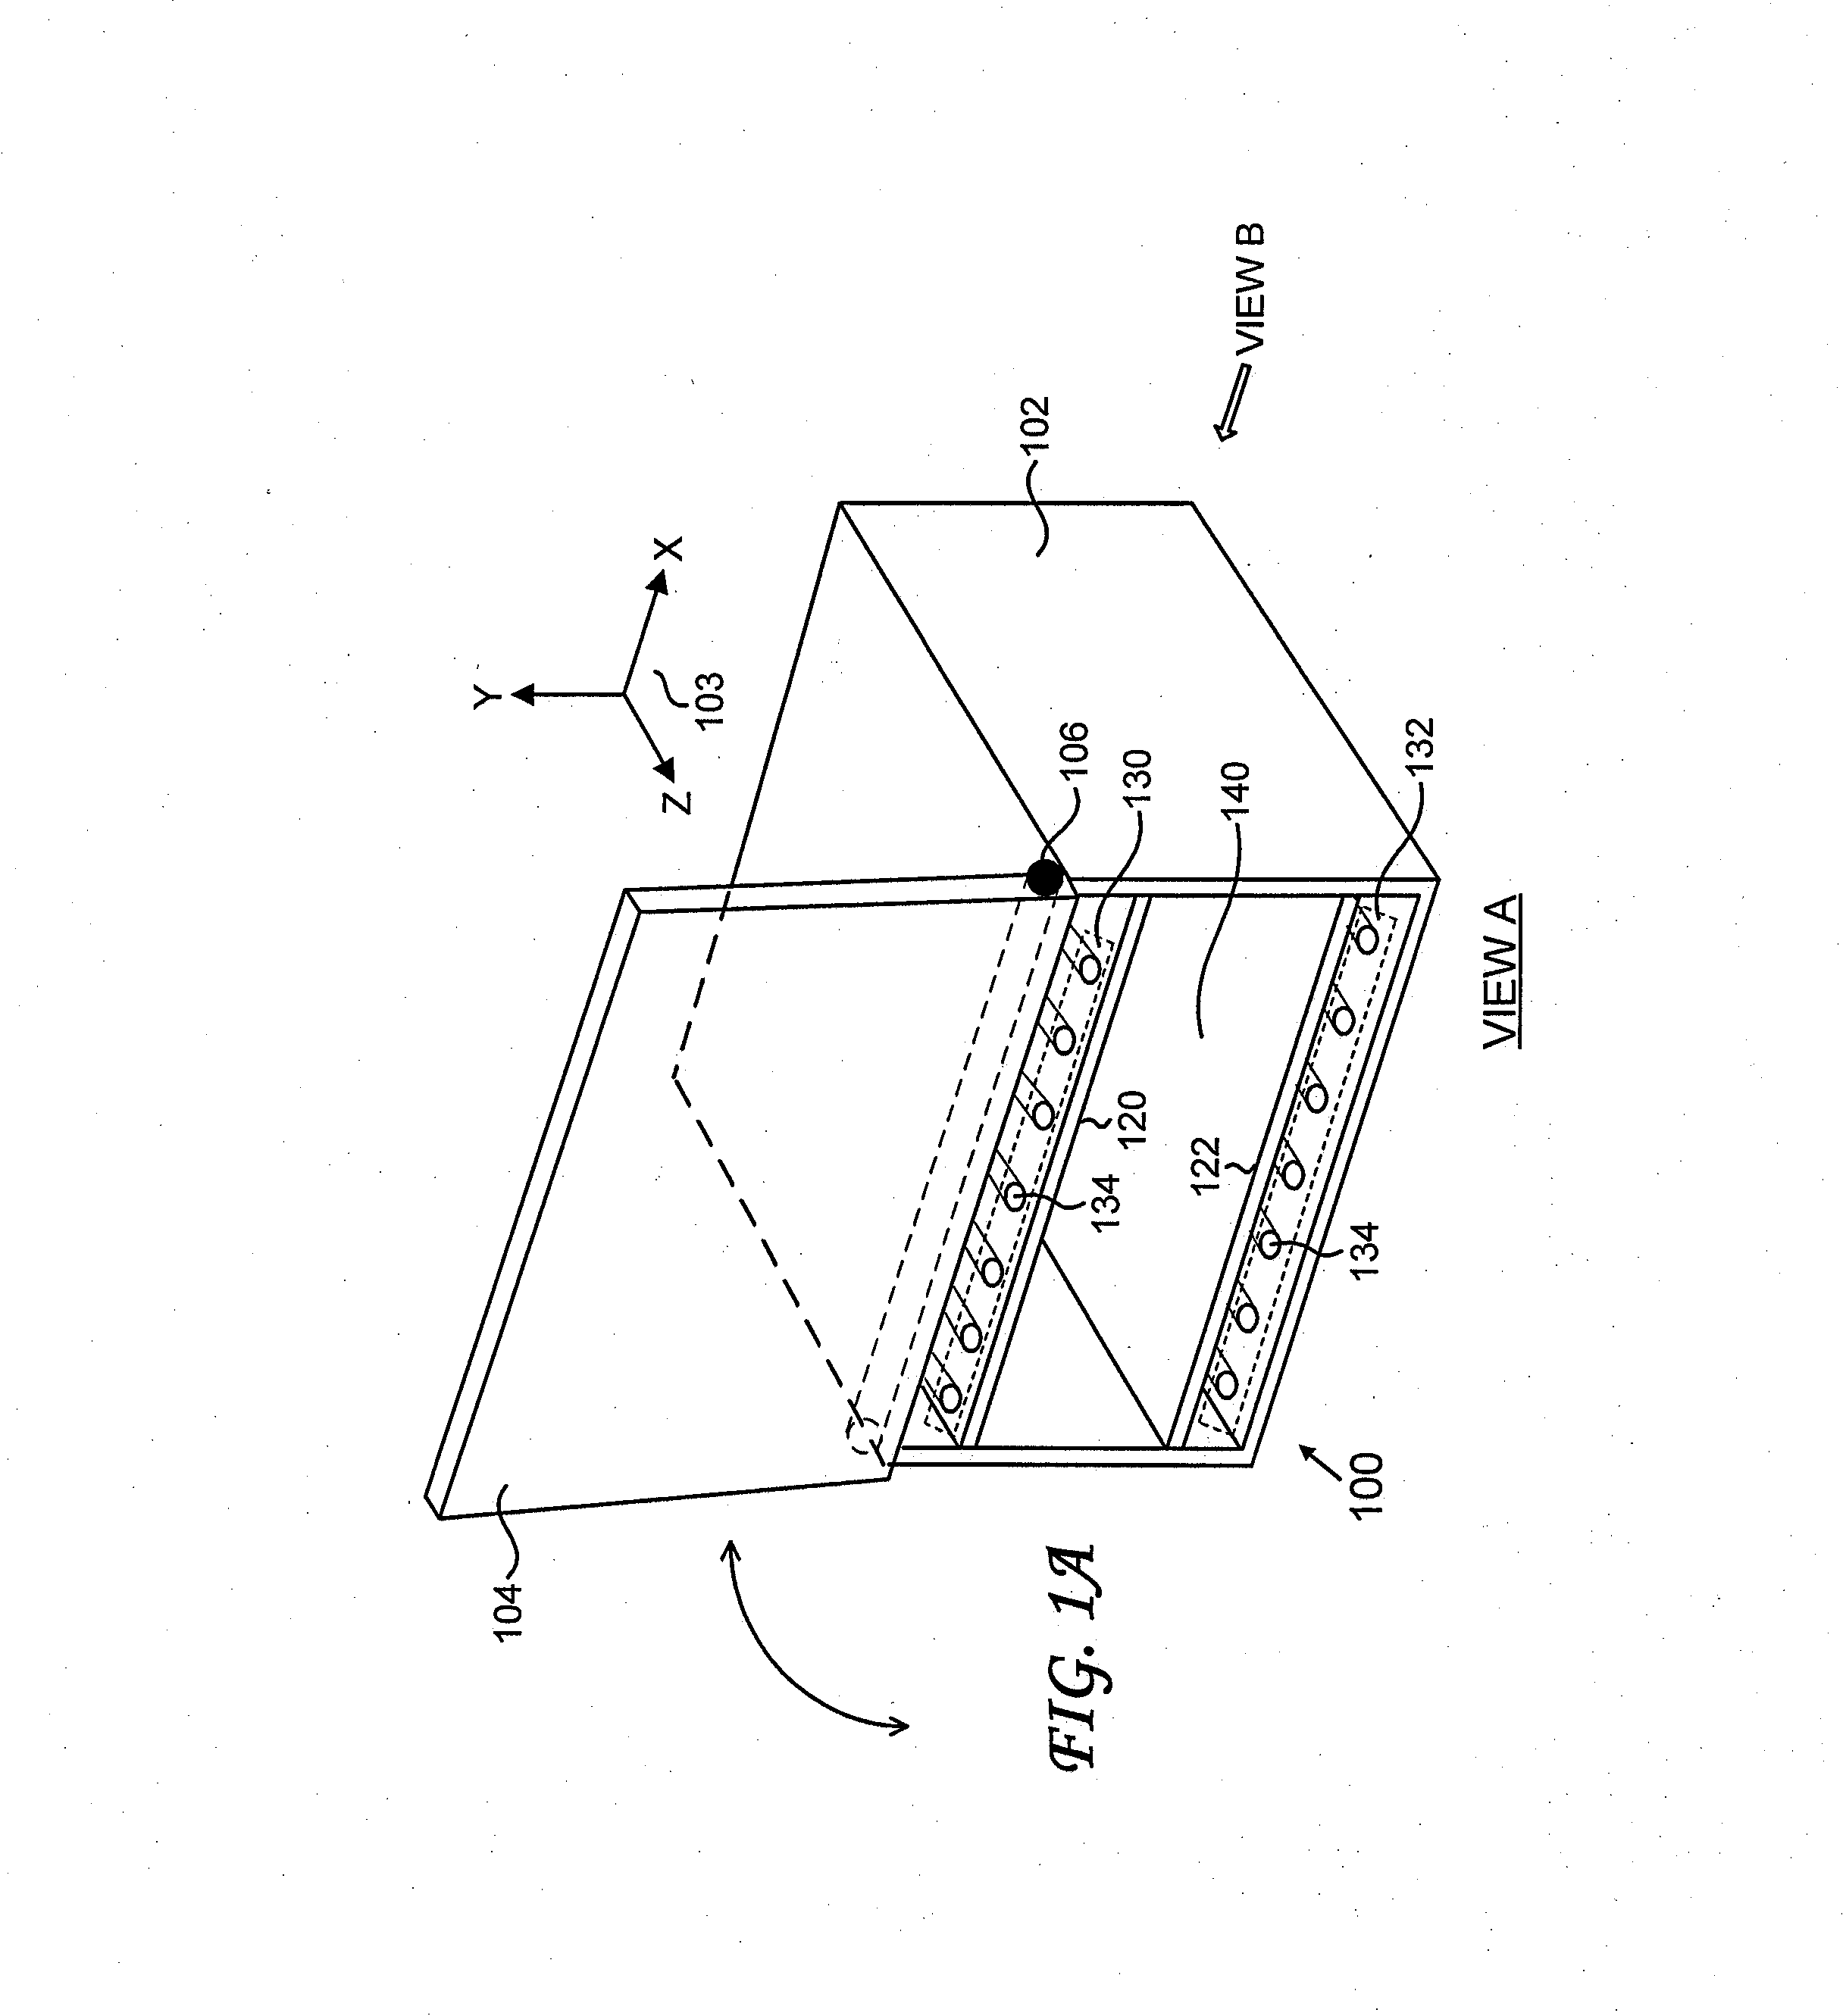 Method and Apparatus for Sterilization of Medical Instruments and Devices by Ultraviolet Sterilization